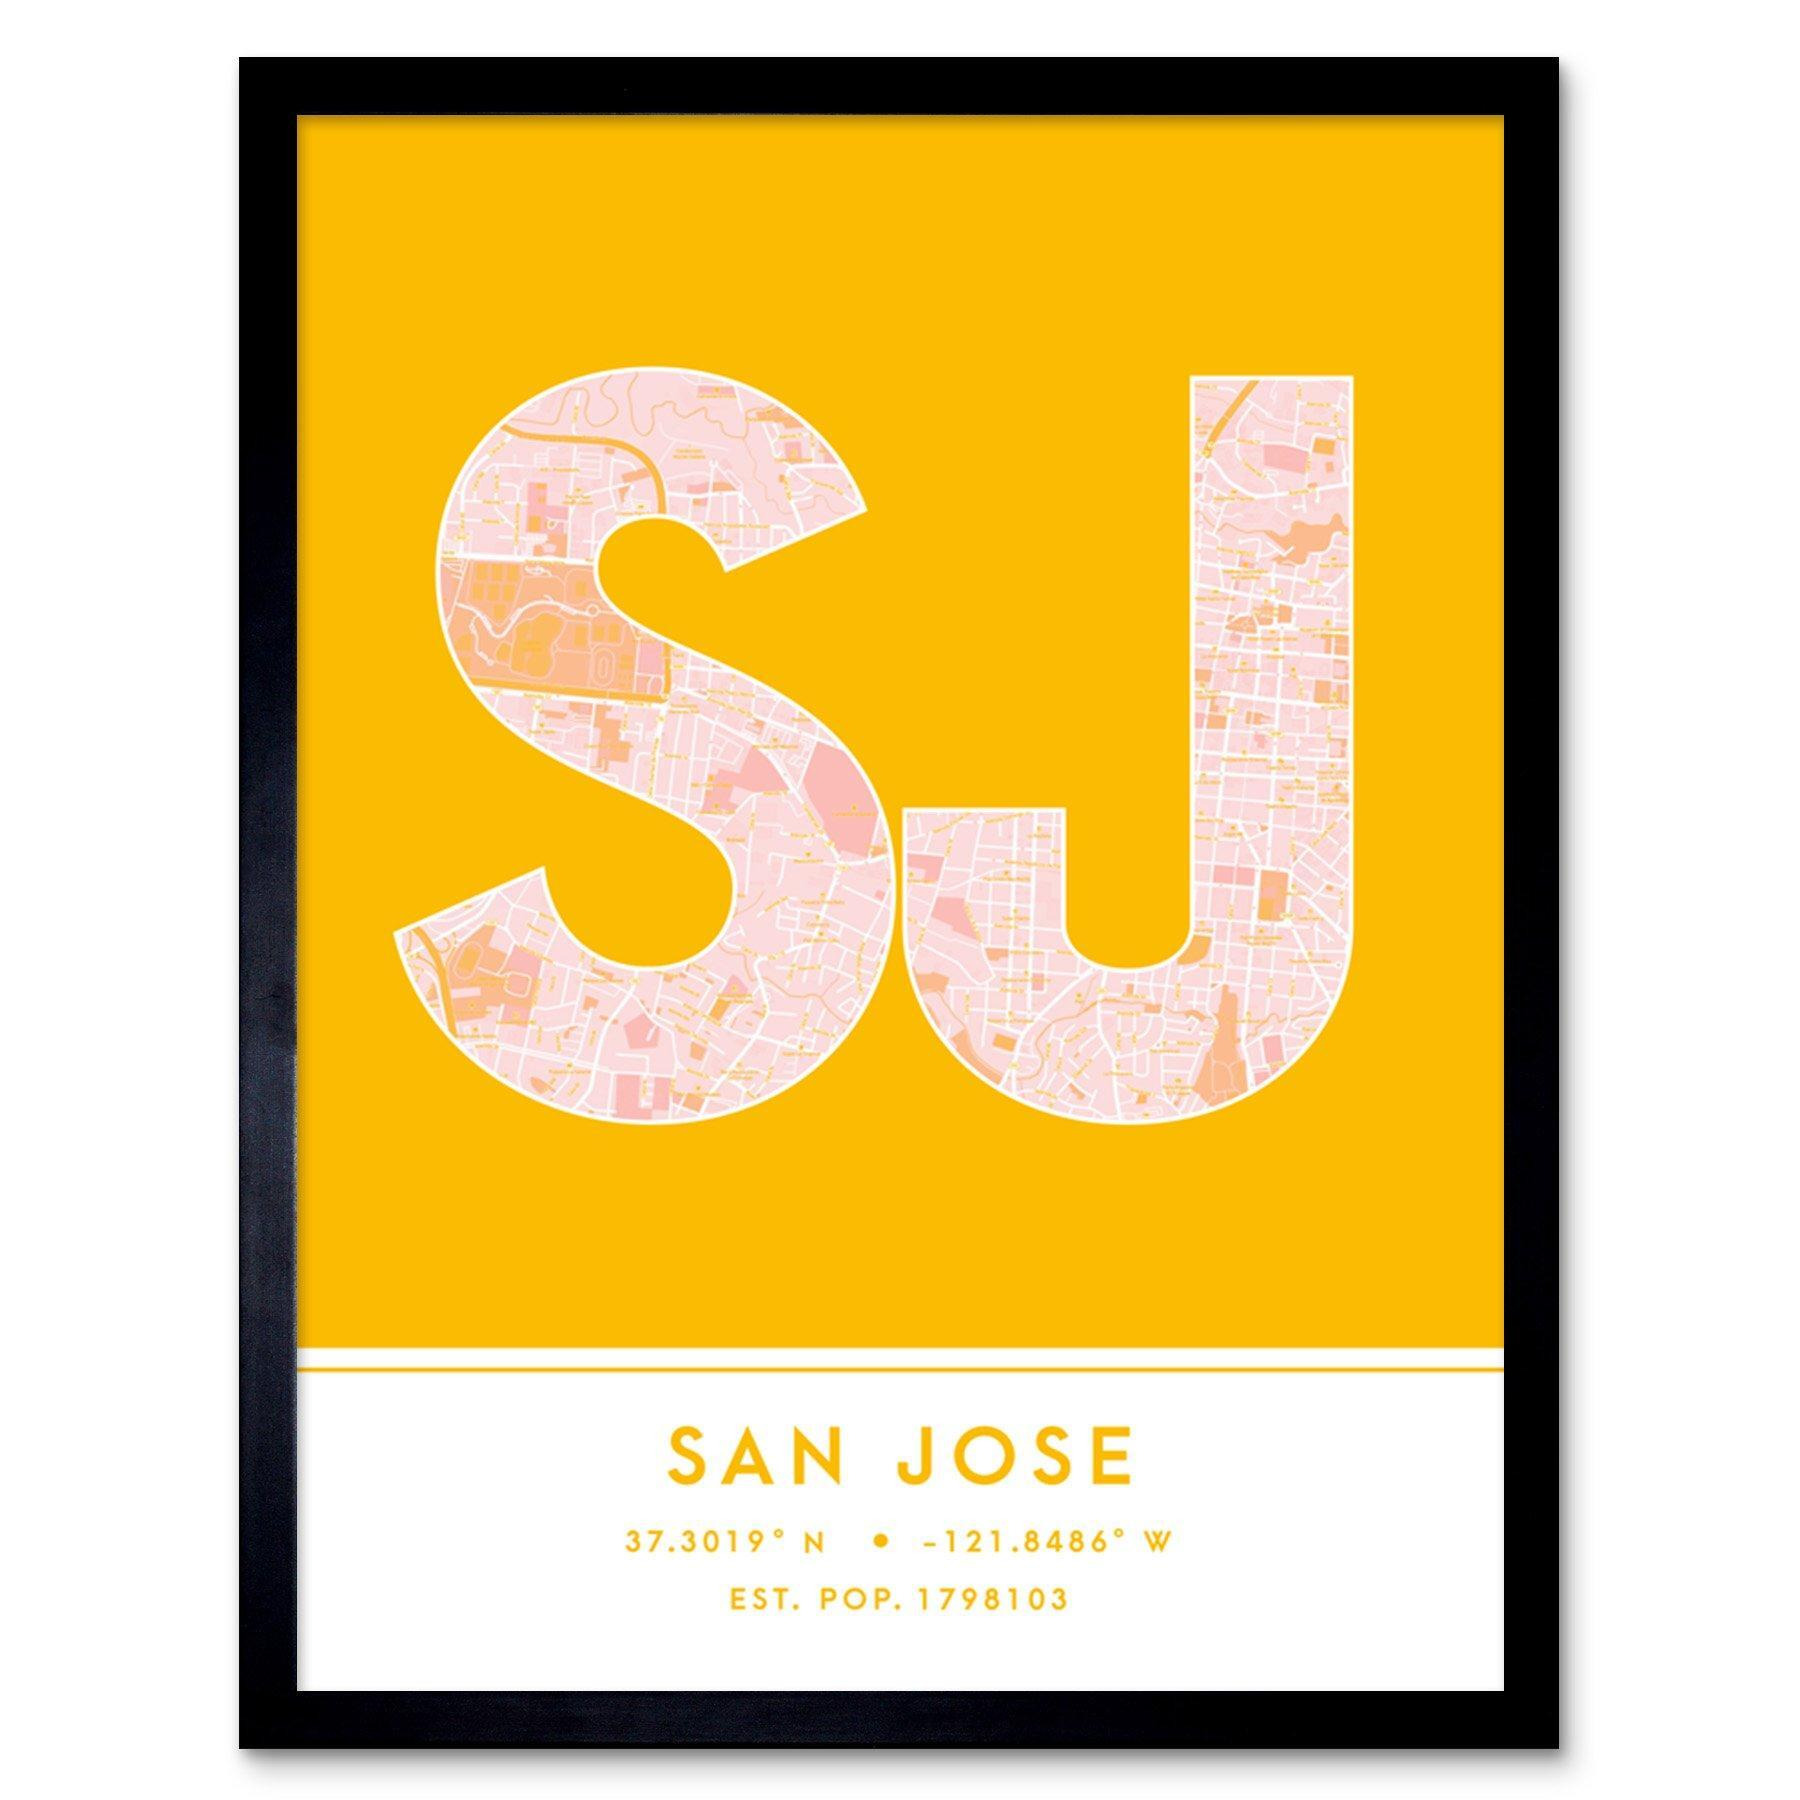 San Jose SJ California United States City Map Modern Typography Stylish Letter Framed Word Wall Art Print Poster for Home Décor - image 1